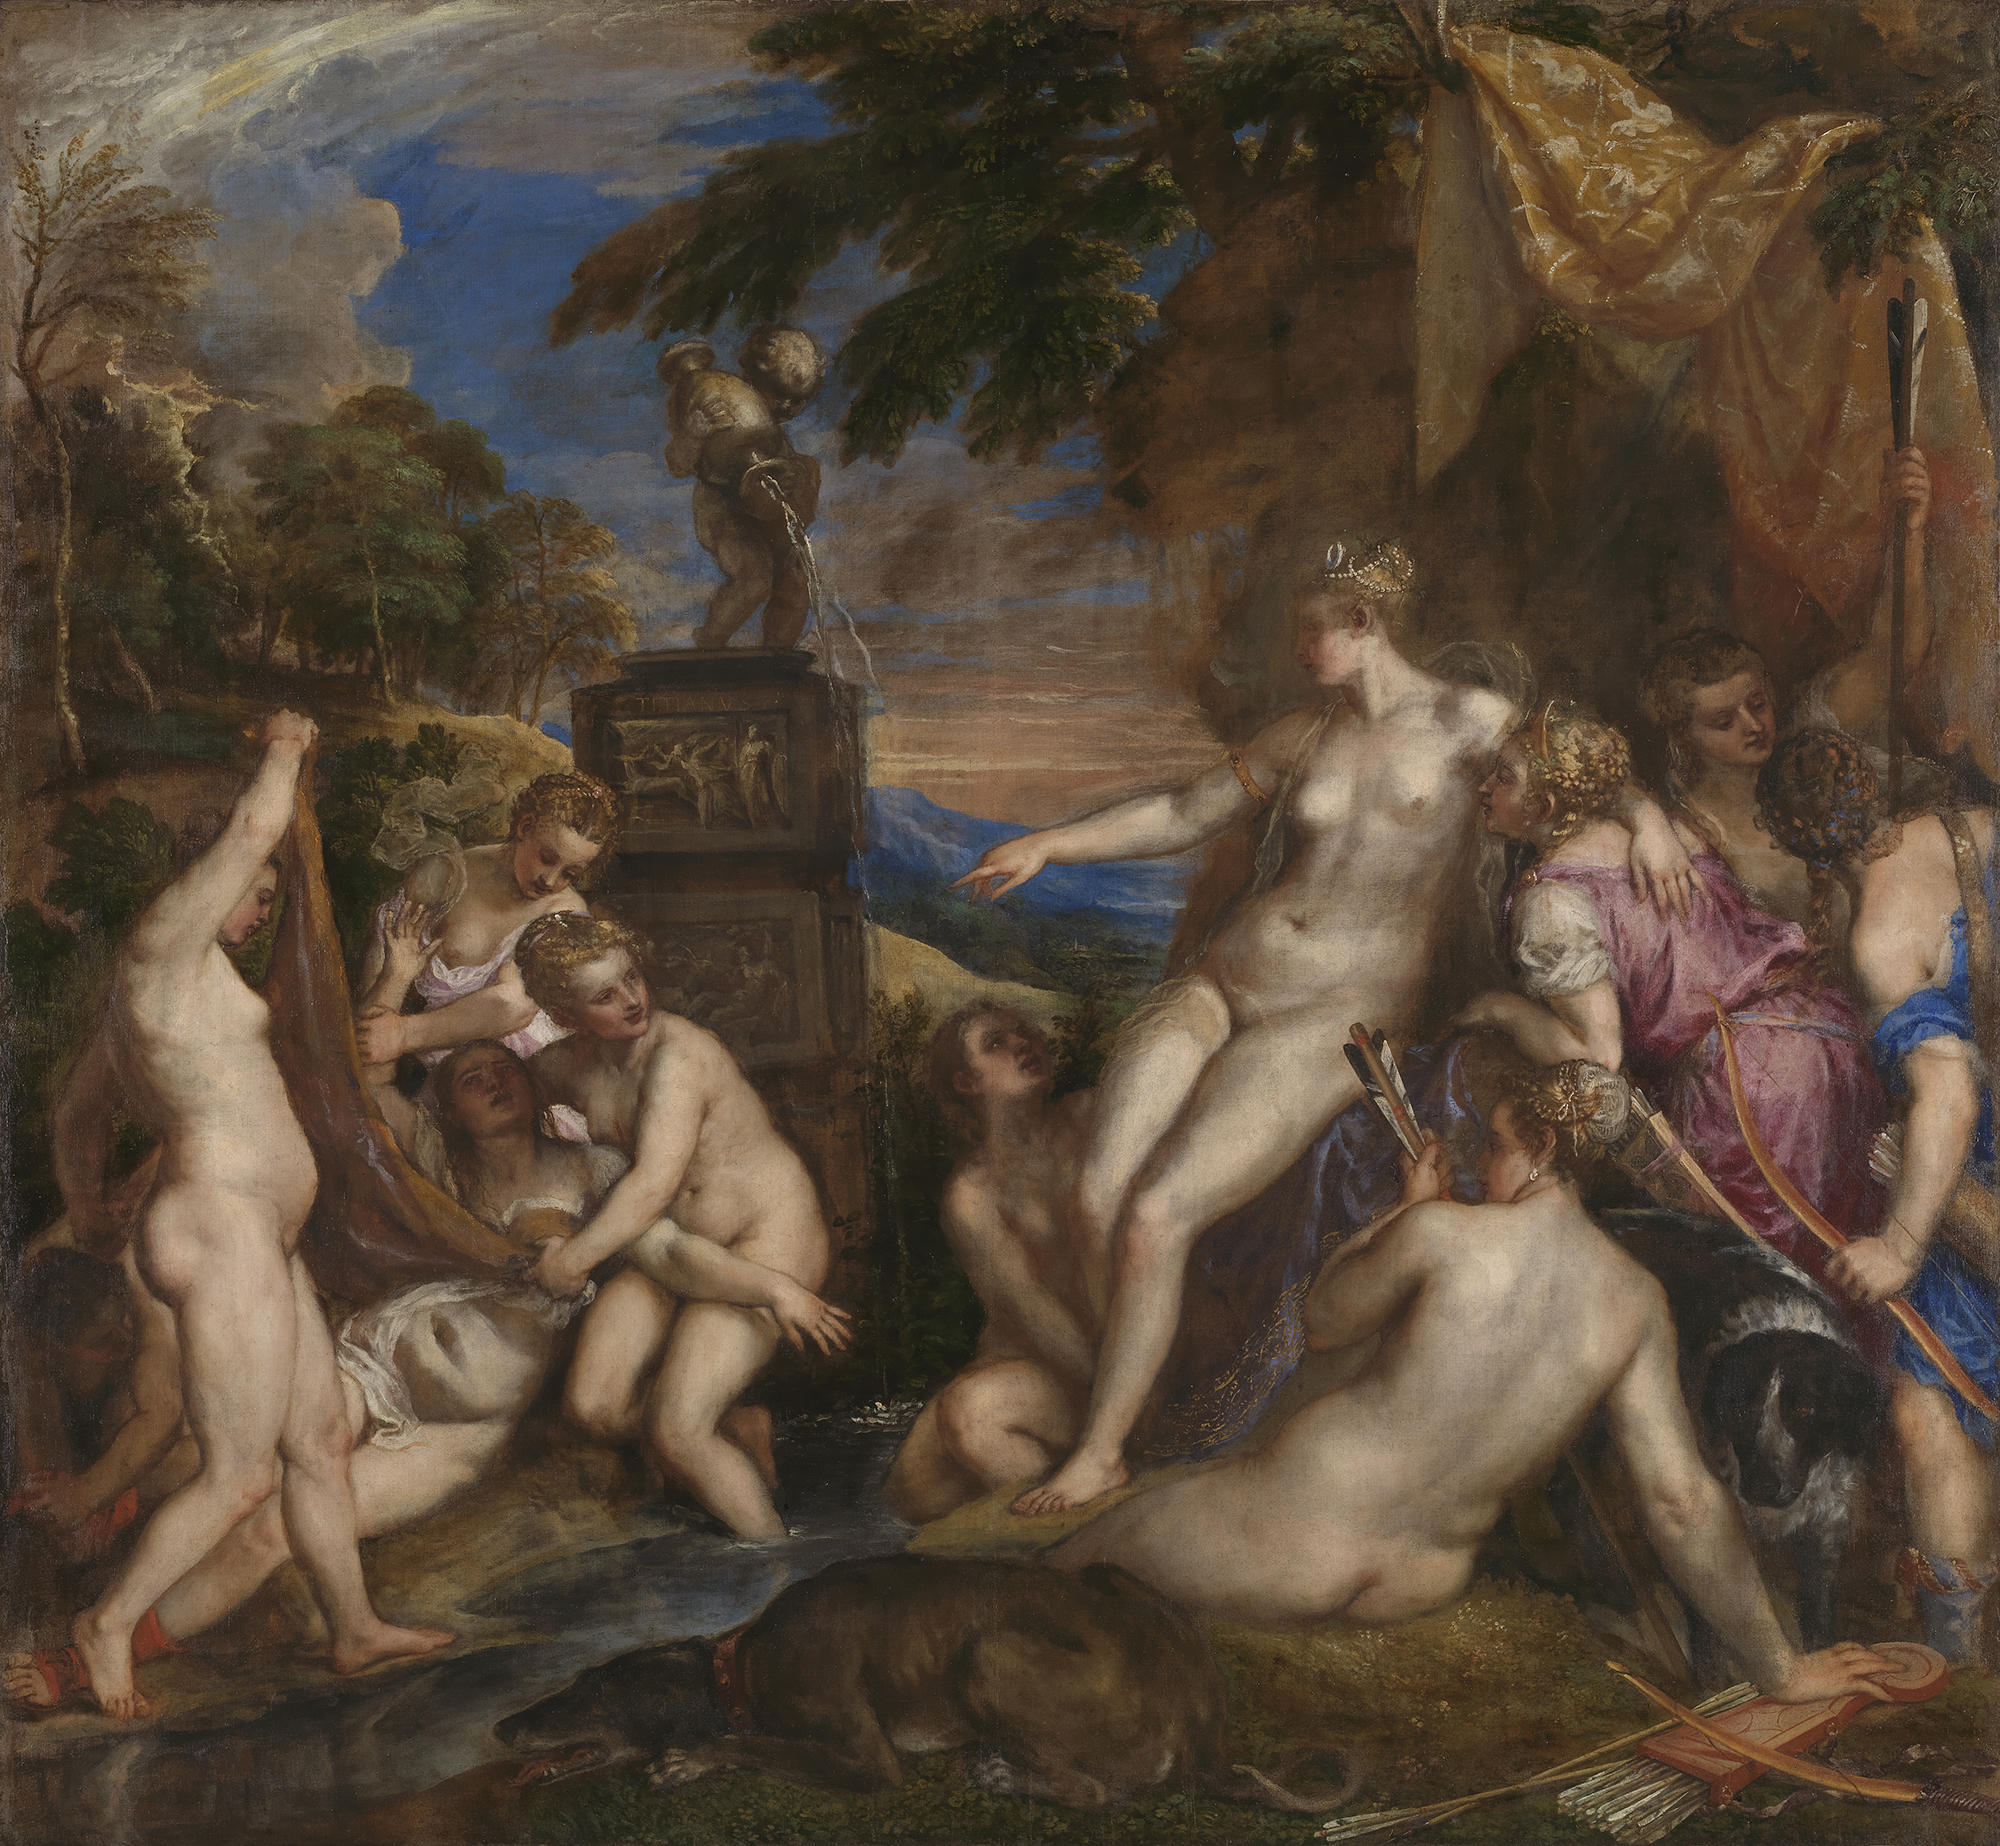 Diana and Callisto by Titian.